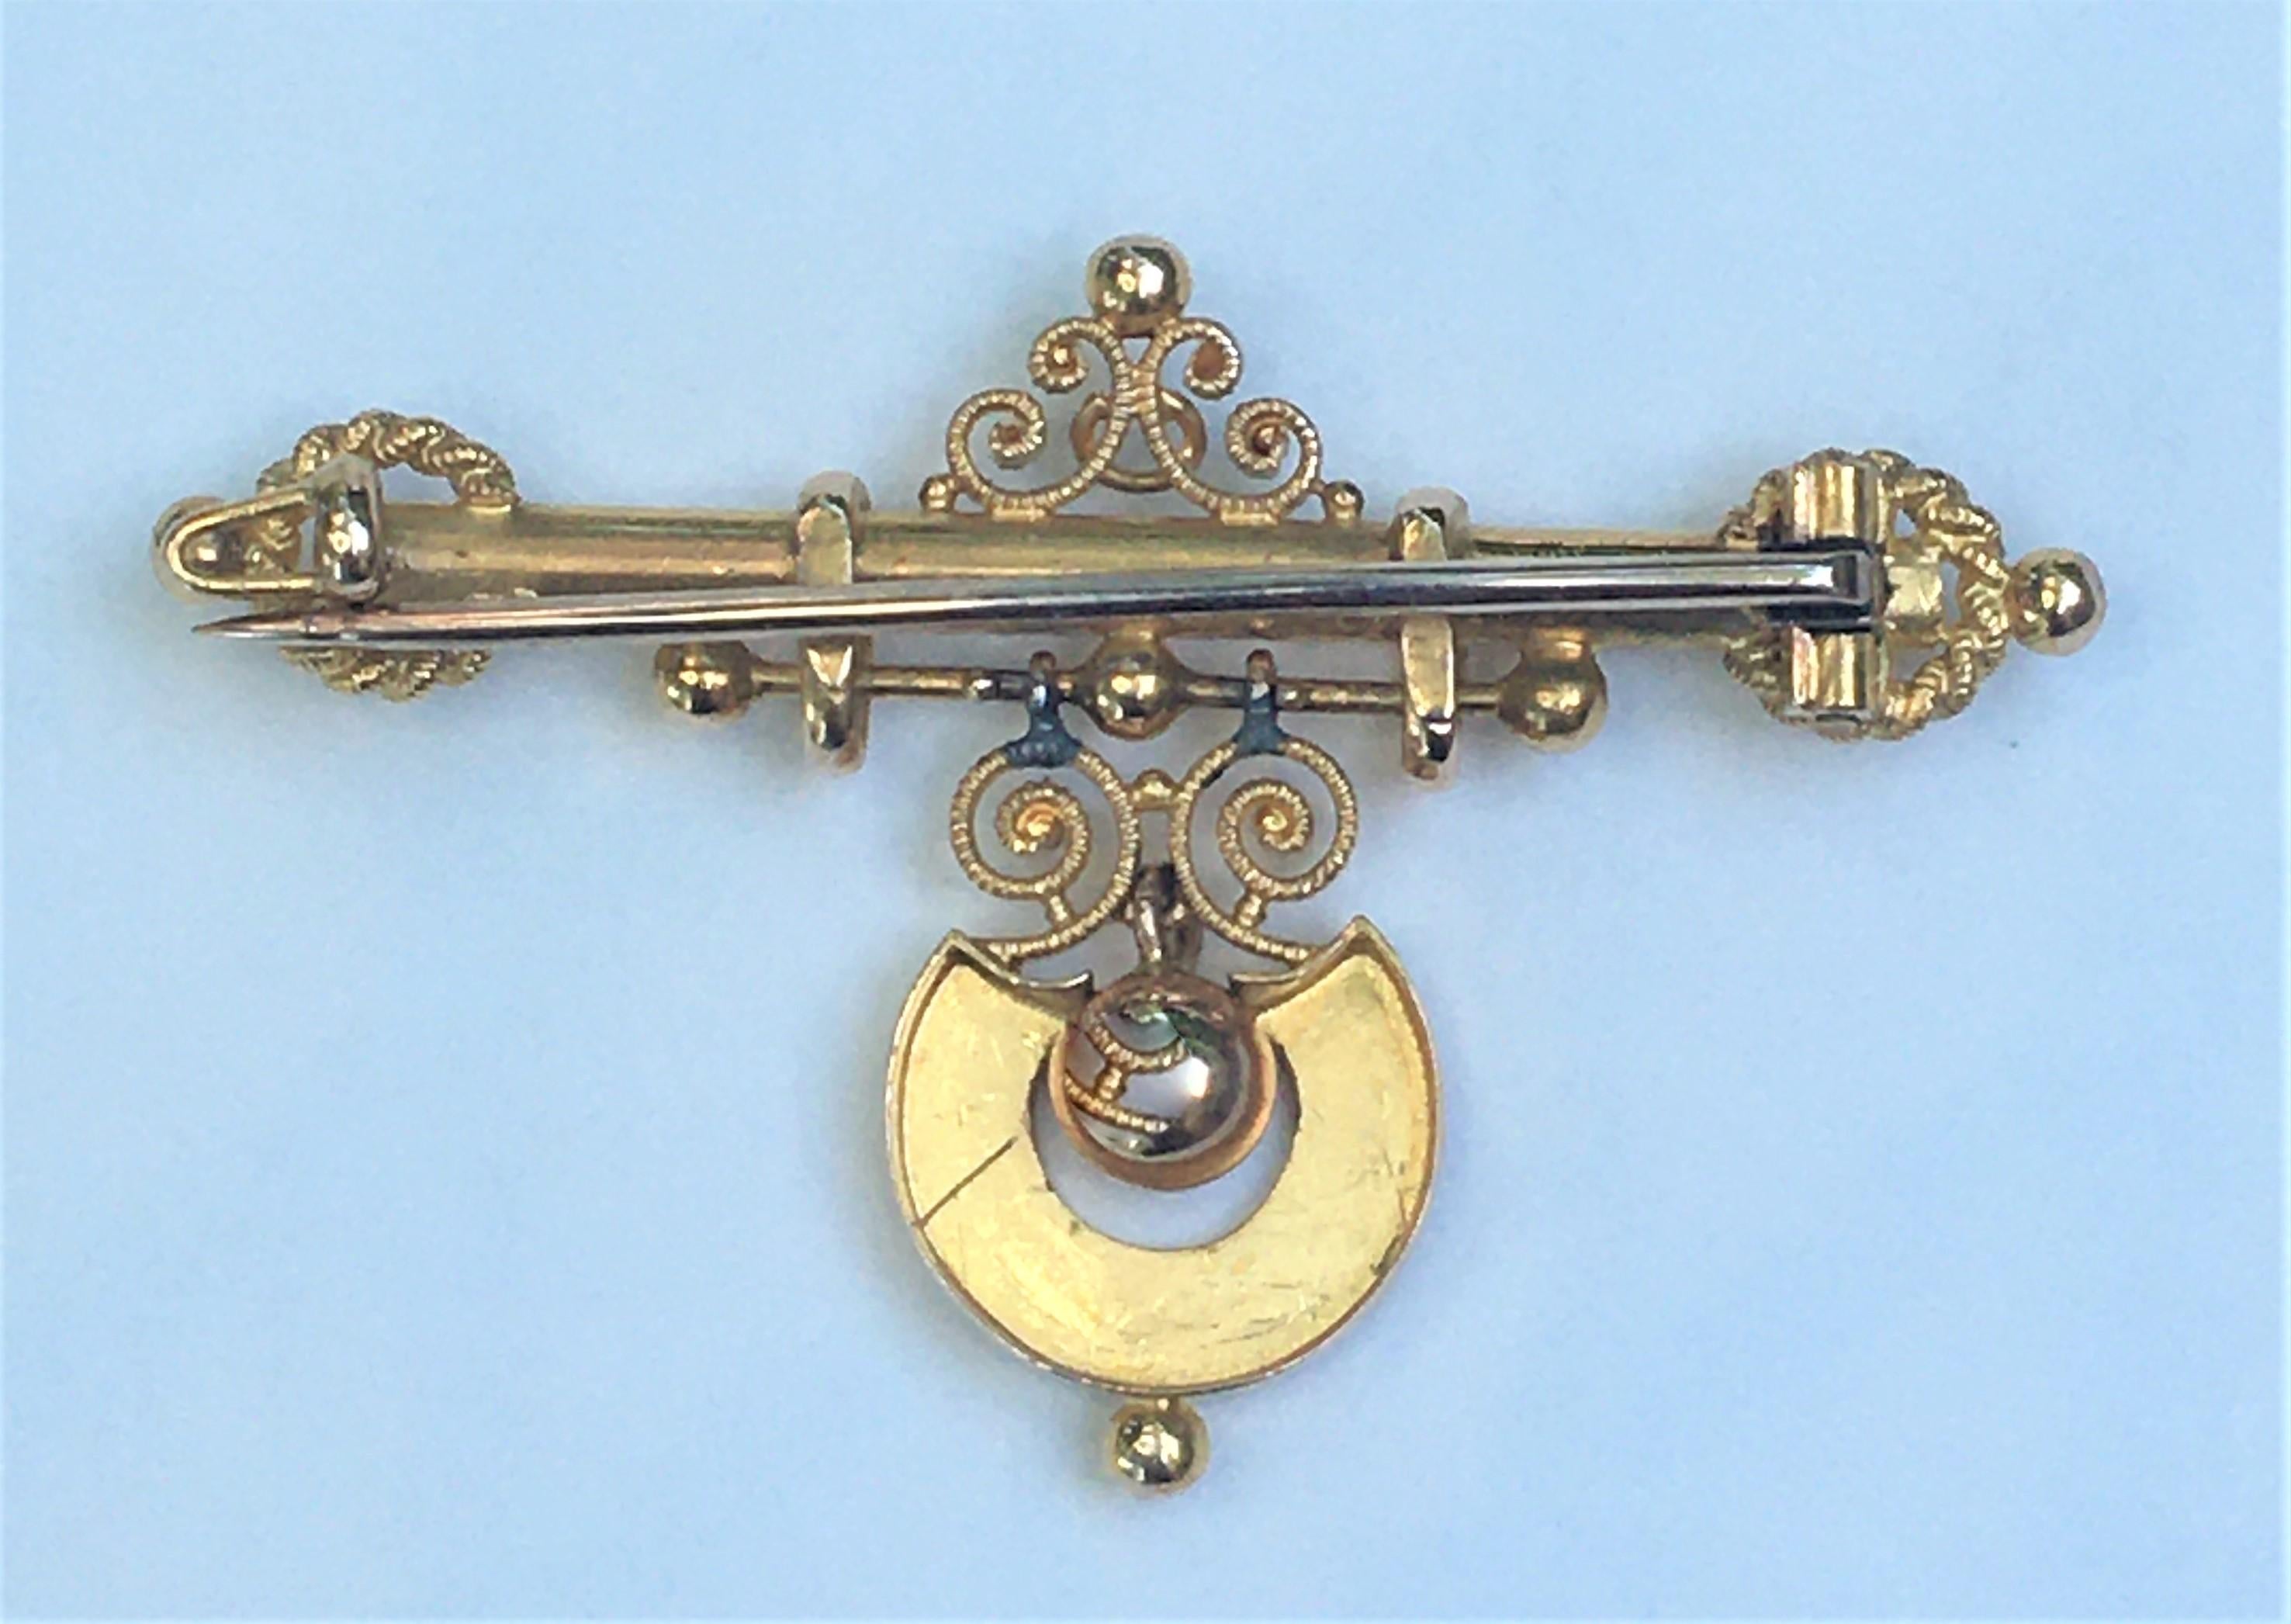 Beautiful Victorian inspired dangle brooch.
14 karat yellow gold with lots of detail 
Dangle part of brooch is approximately 13mm wide
Height approximately 29mm
Length approximately 45mm
Stick pin with c clasp
Has some patina